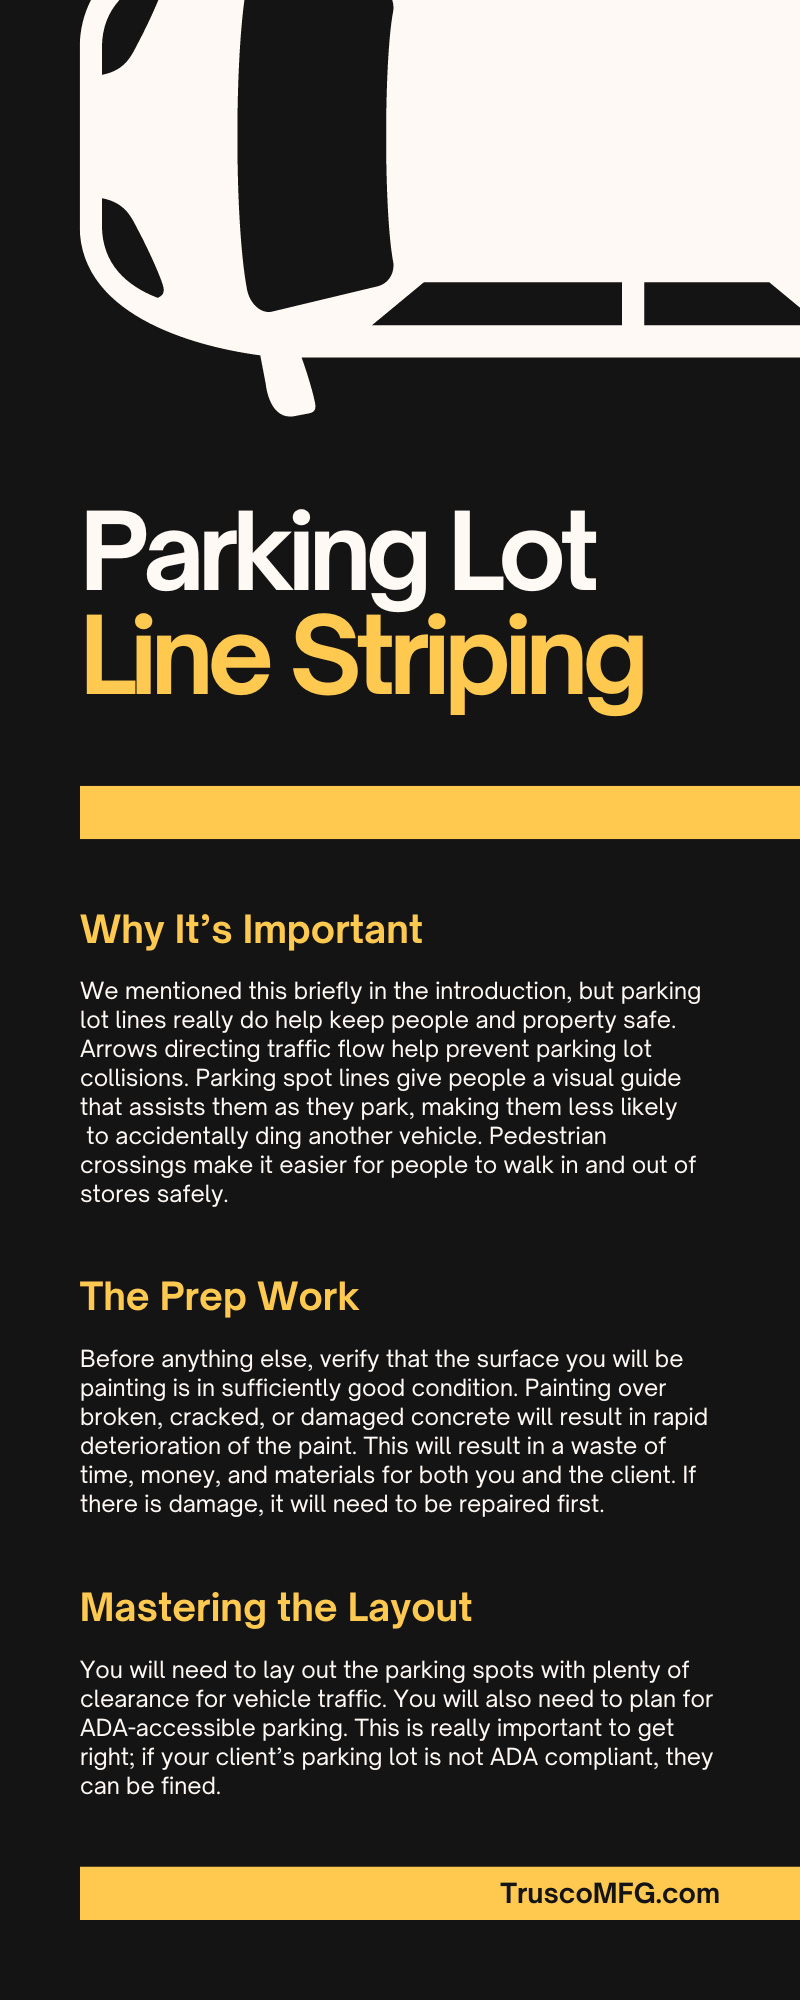 The Ultimate Guide to Parking Lot Line Striping